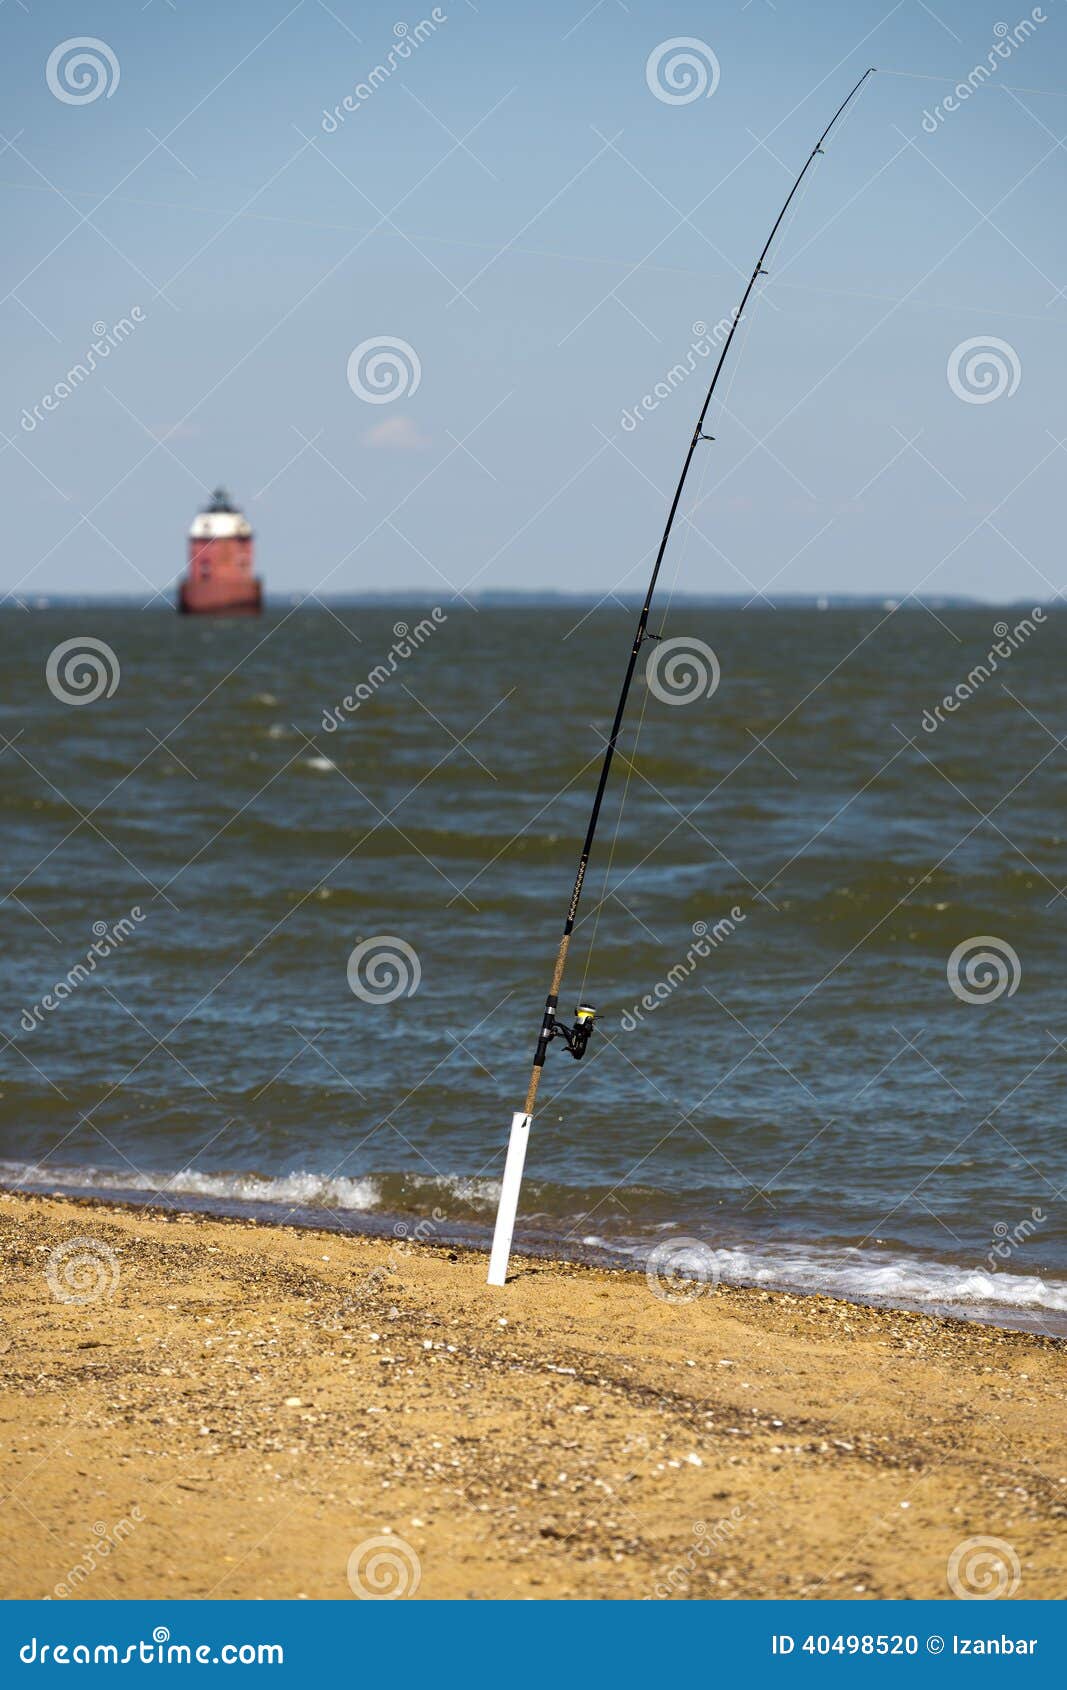 Fishing pole on the beach stock photo. Image of reel - 40498520